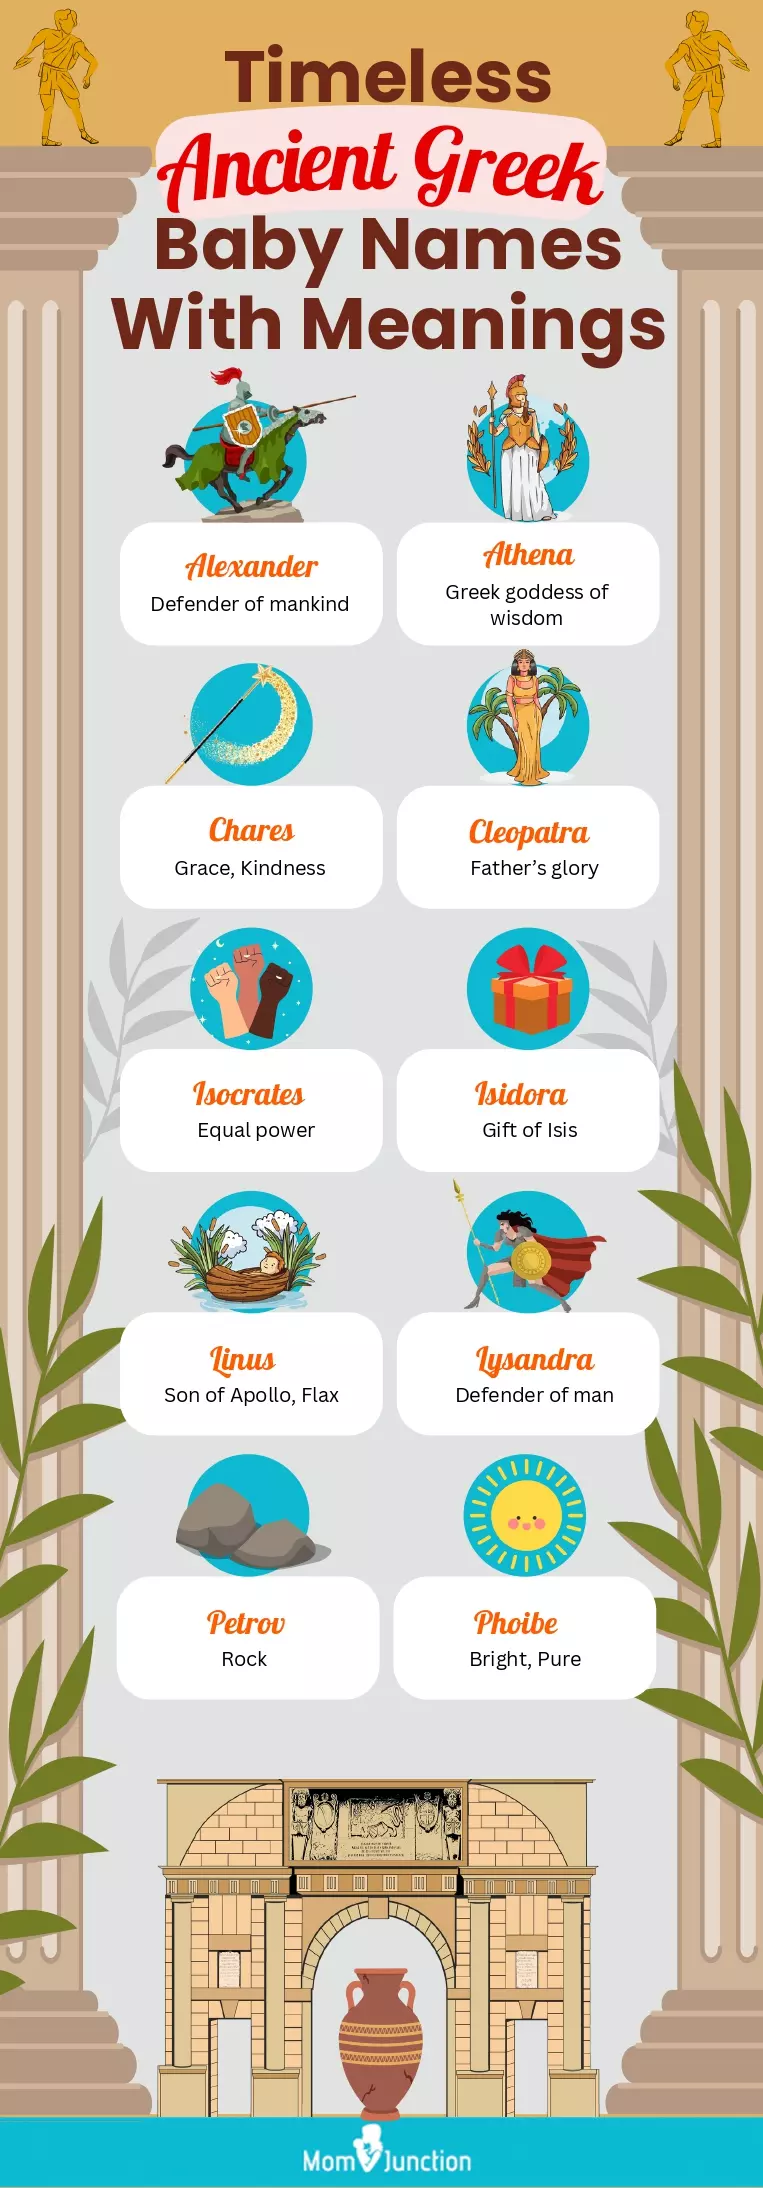 timeless ancient greek baby names with meanings (infographic)